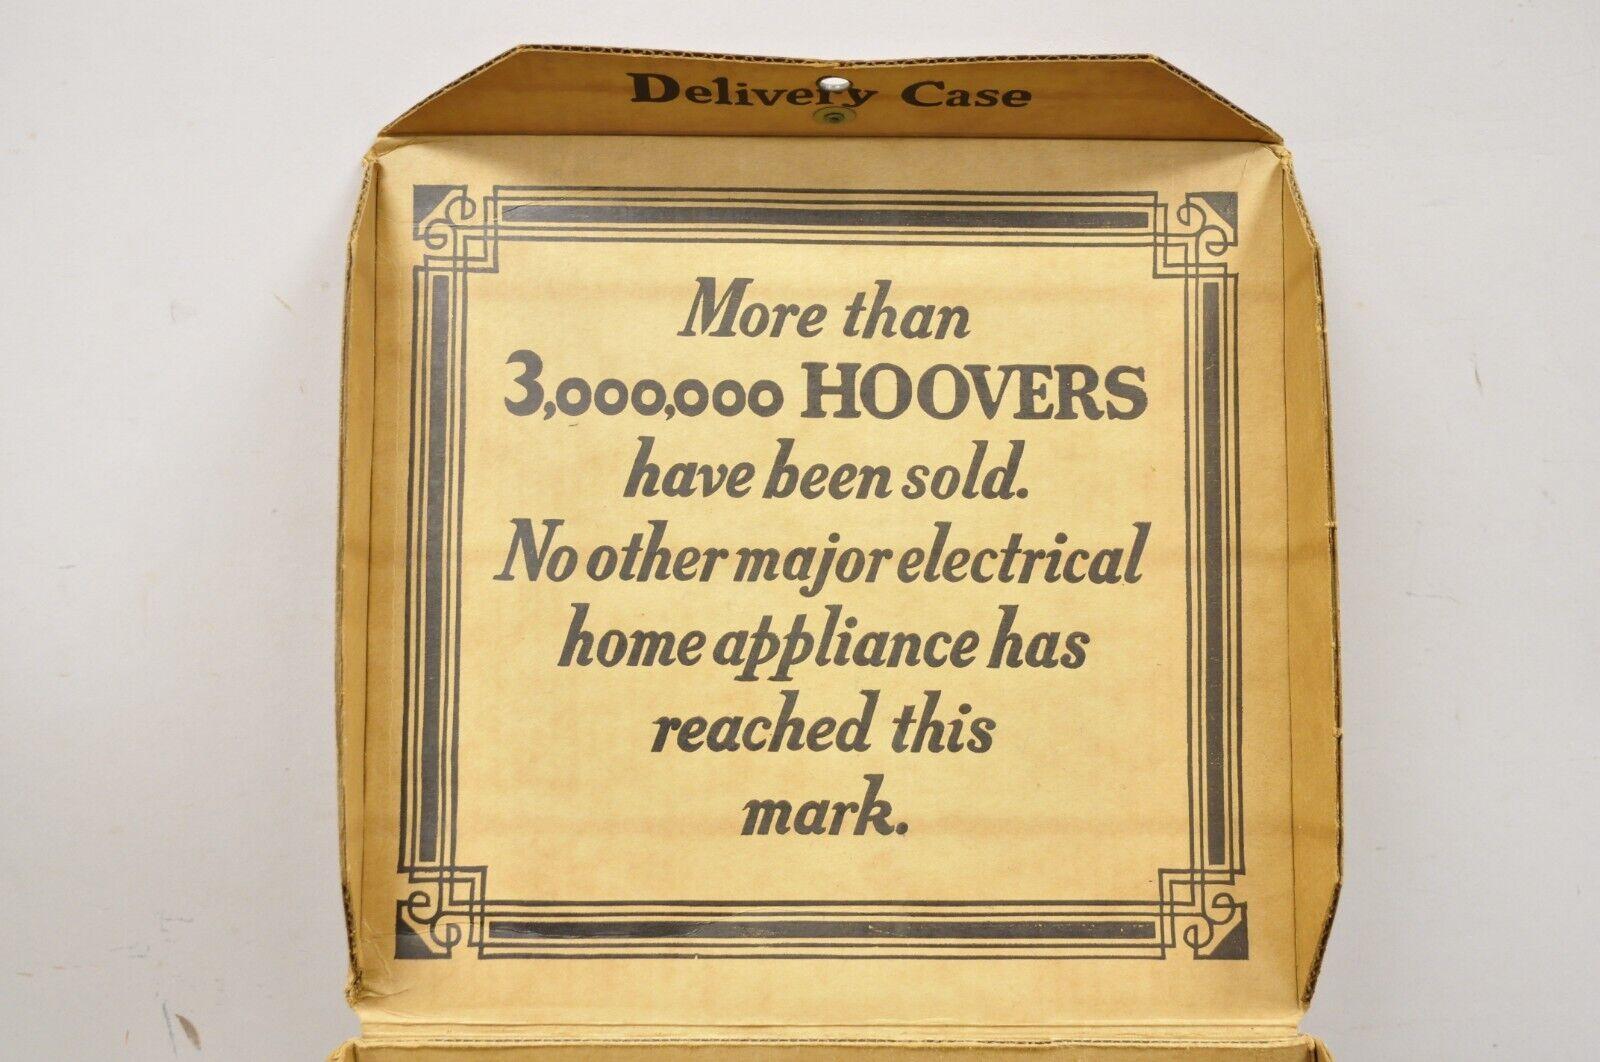 Paper The Hoover Co Model 450 Advertisement Cardboard Box NRA Sticker Delivery Box For Sale